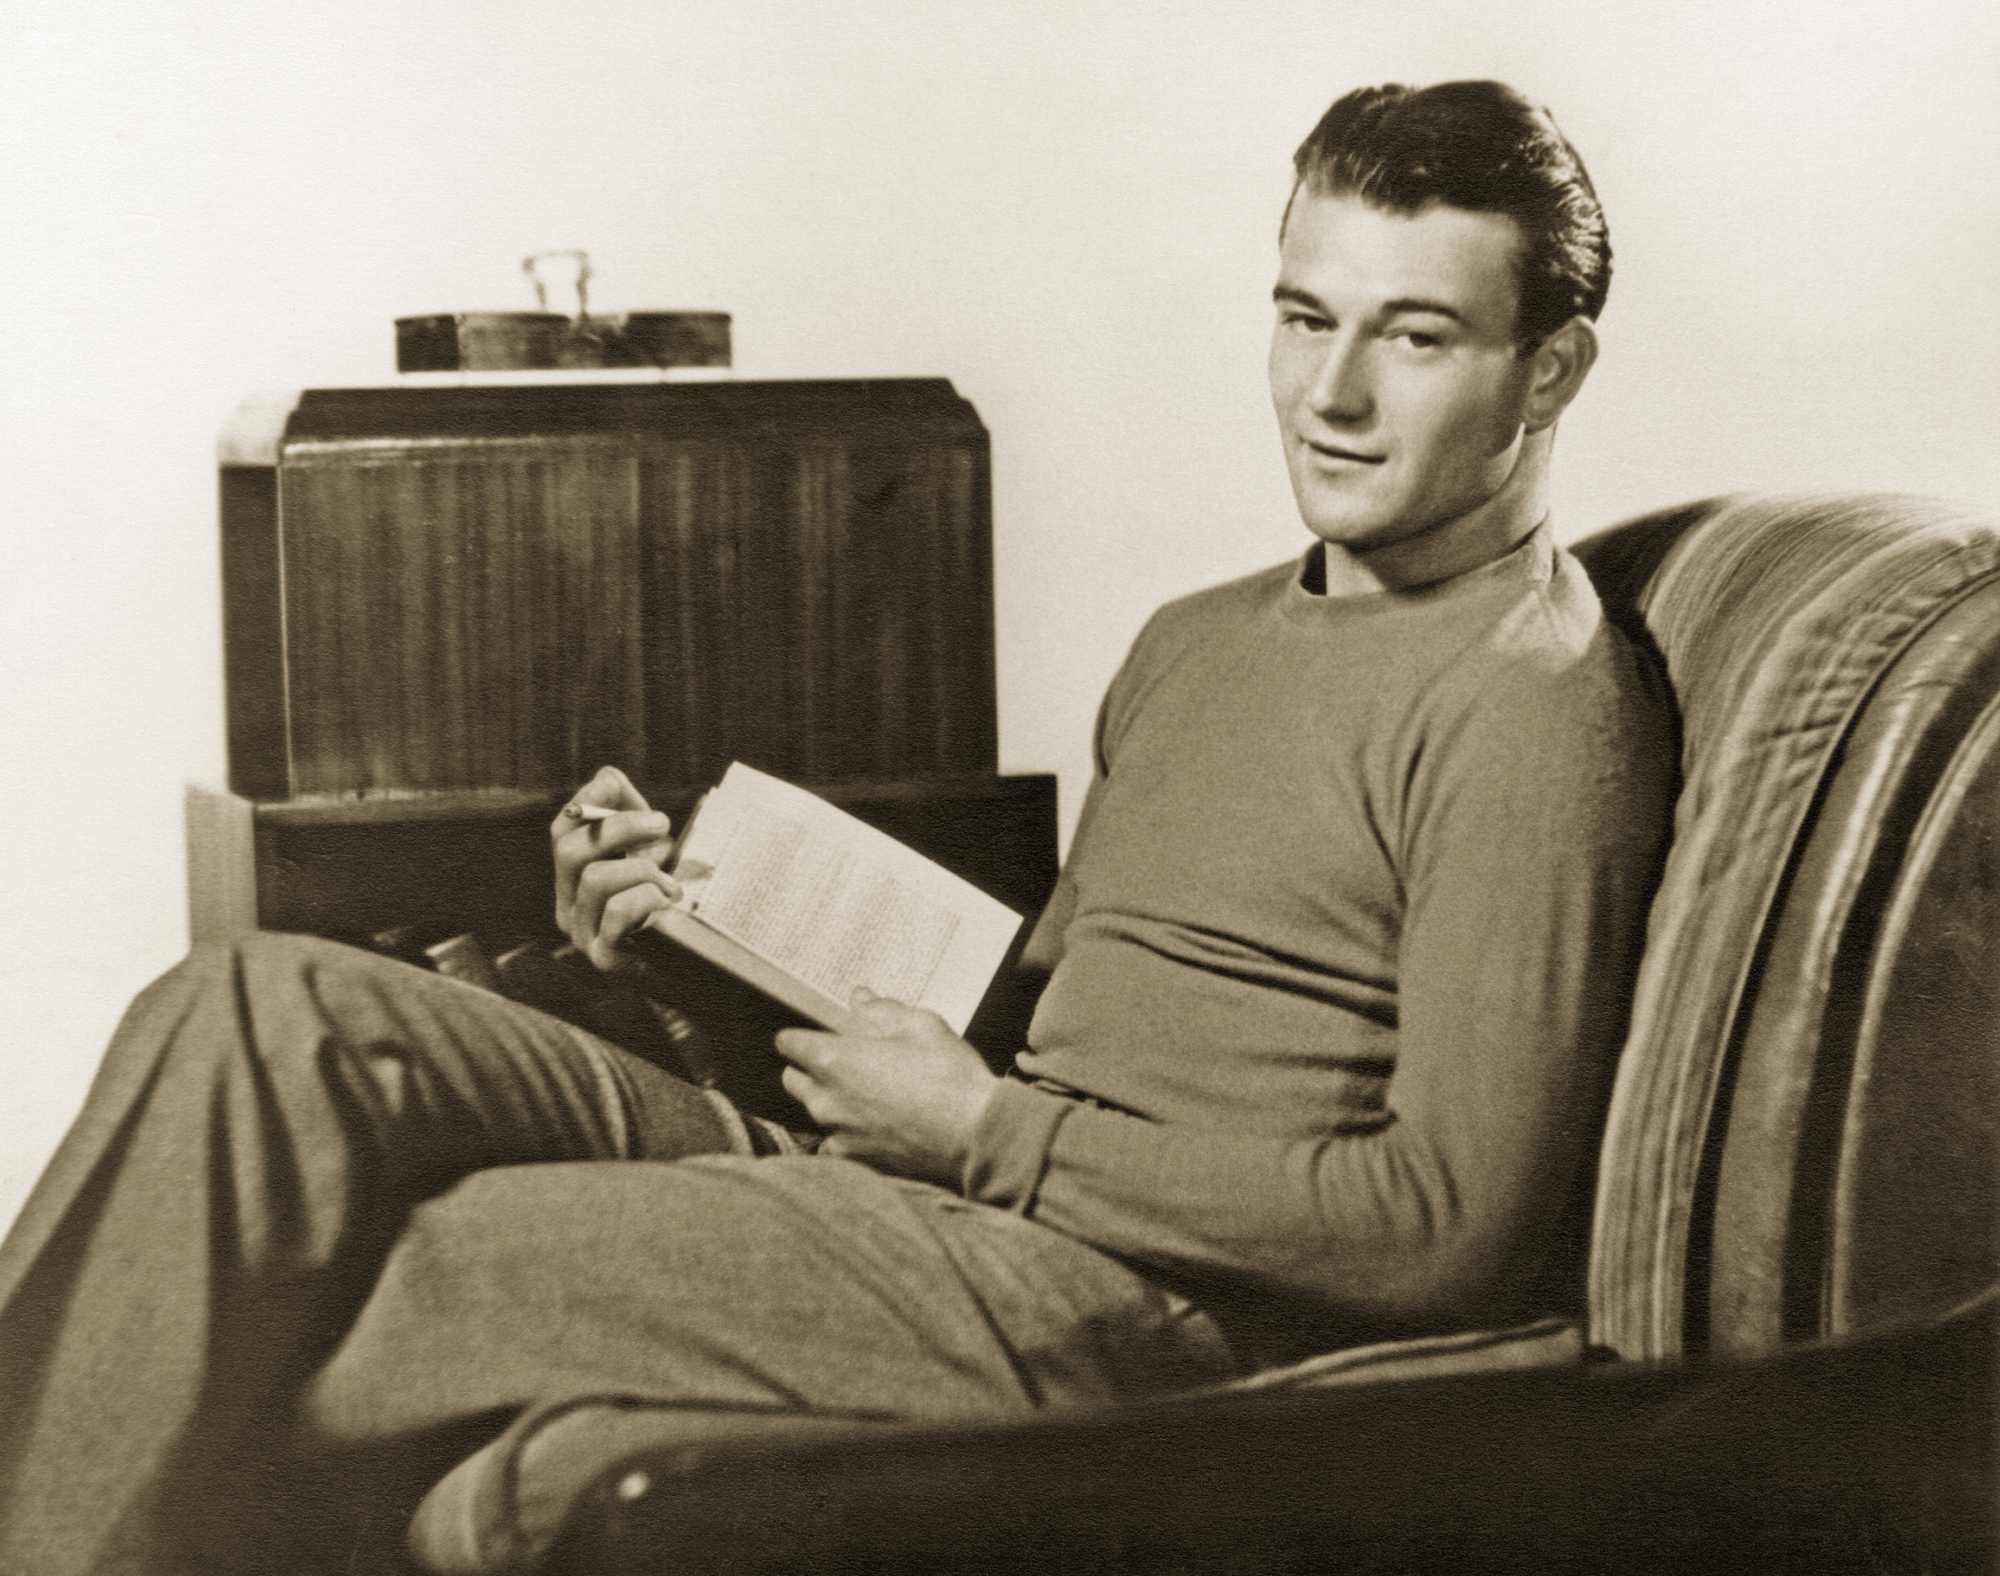 Actor John Wayne in a sepia tone picture, sitting in a sofa chair, holding a book.